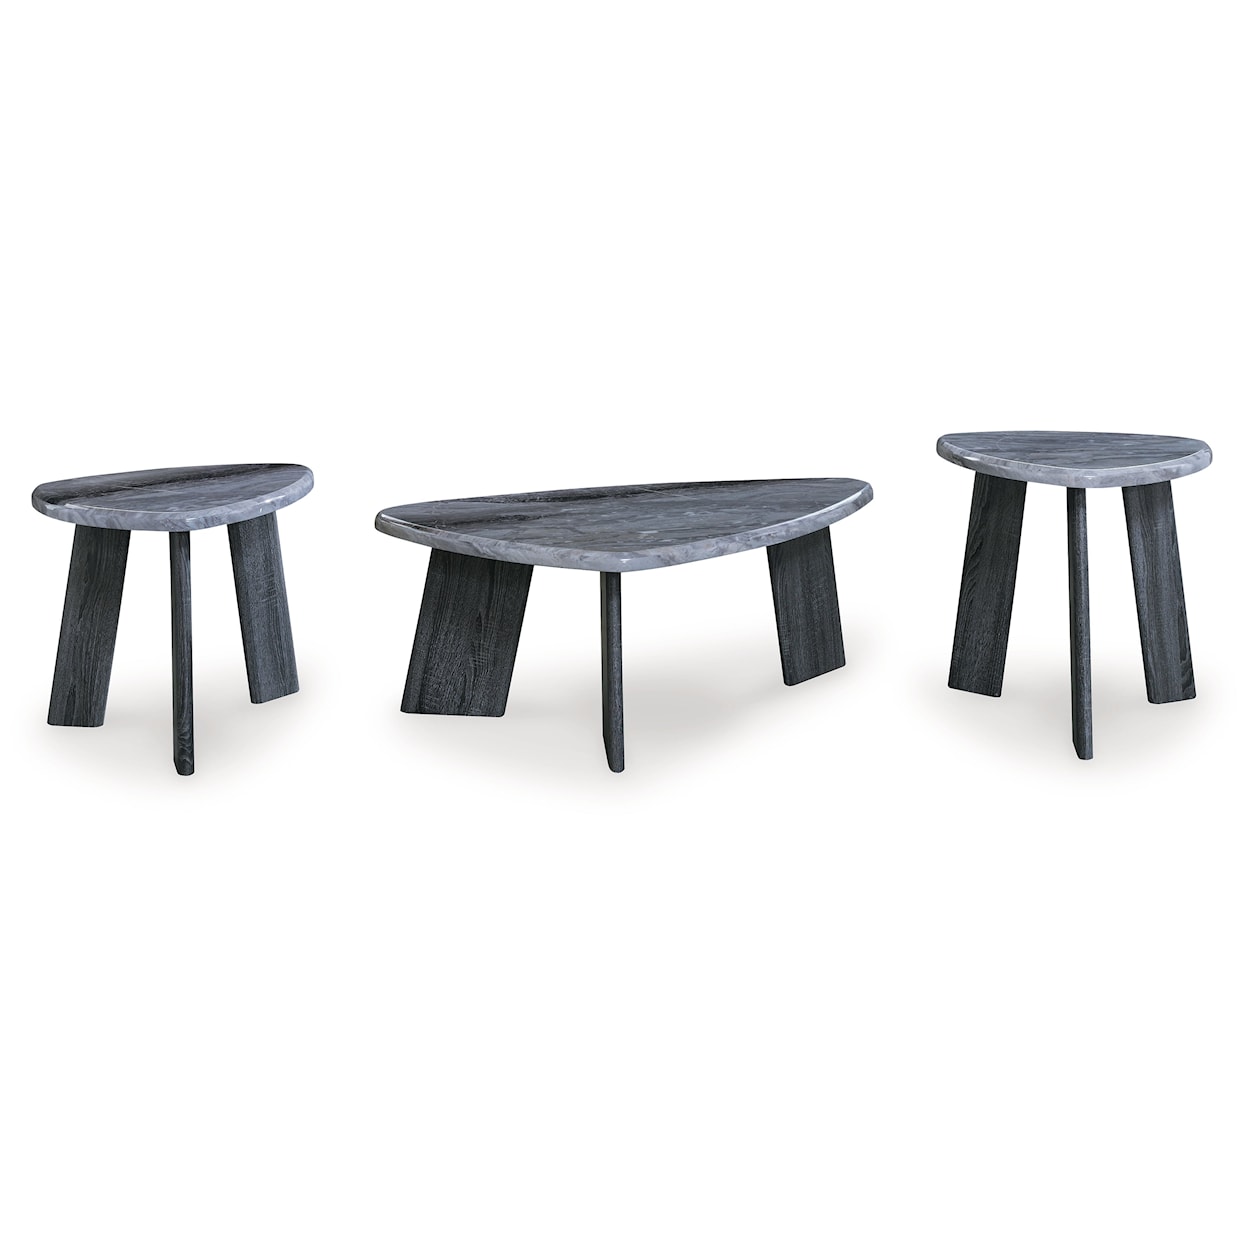 Signature Design by Ashley Furniture Bluebond Occasional Table (Set of 3)